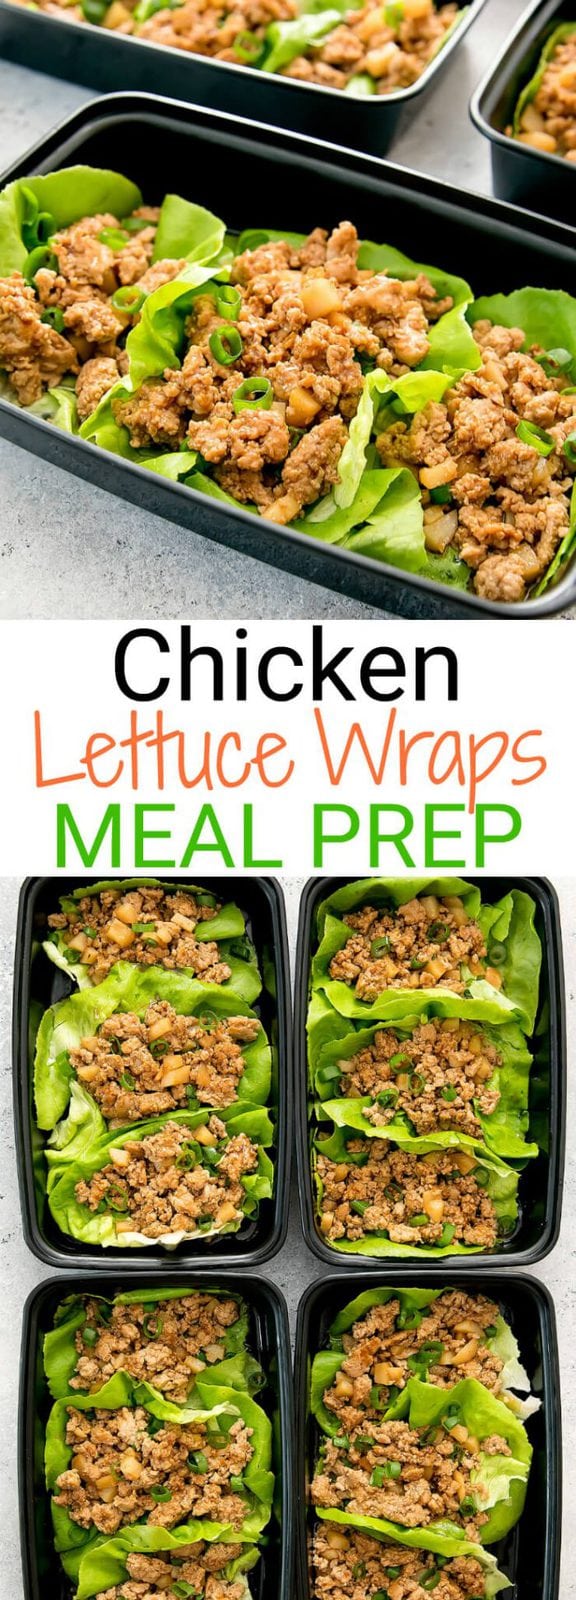 PF Chang's style Chicken Lettuce Wraps Meal Prep